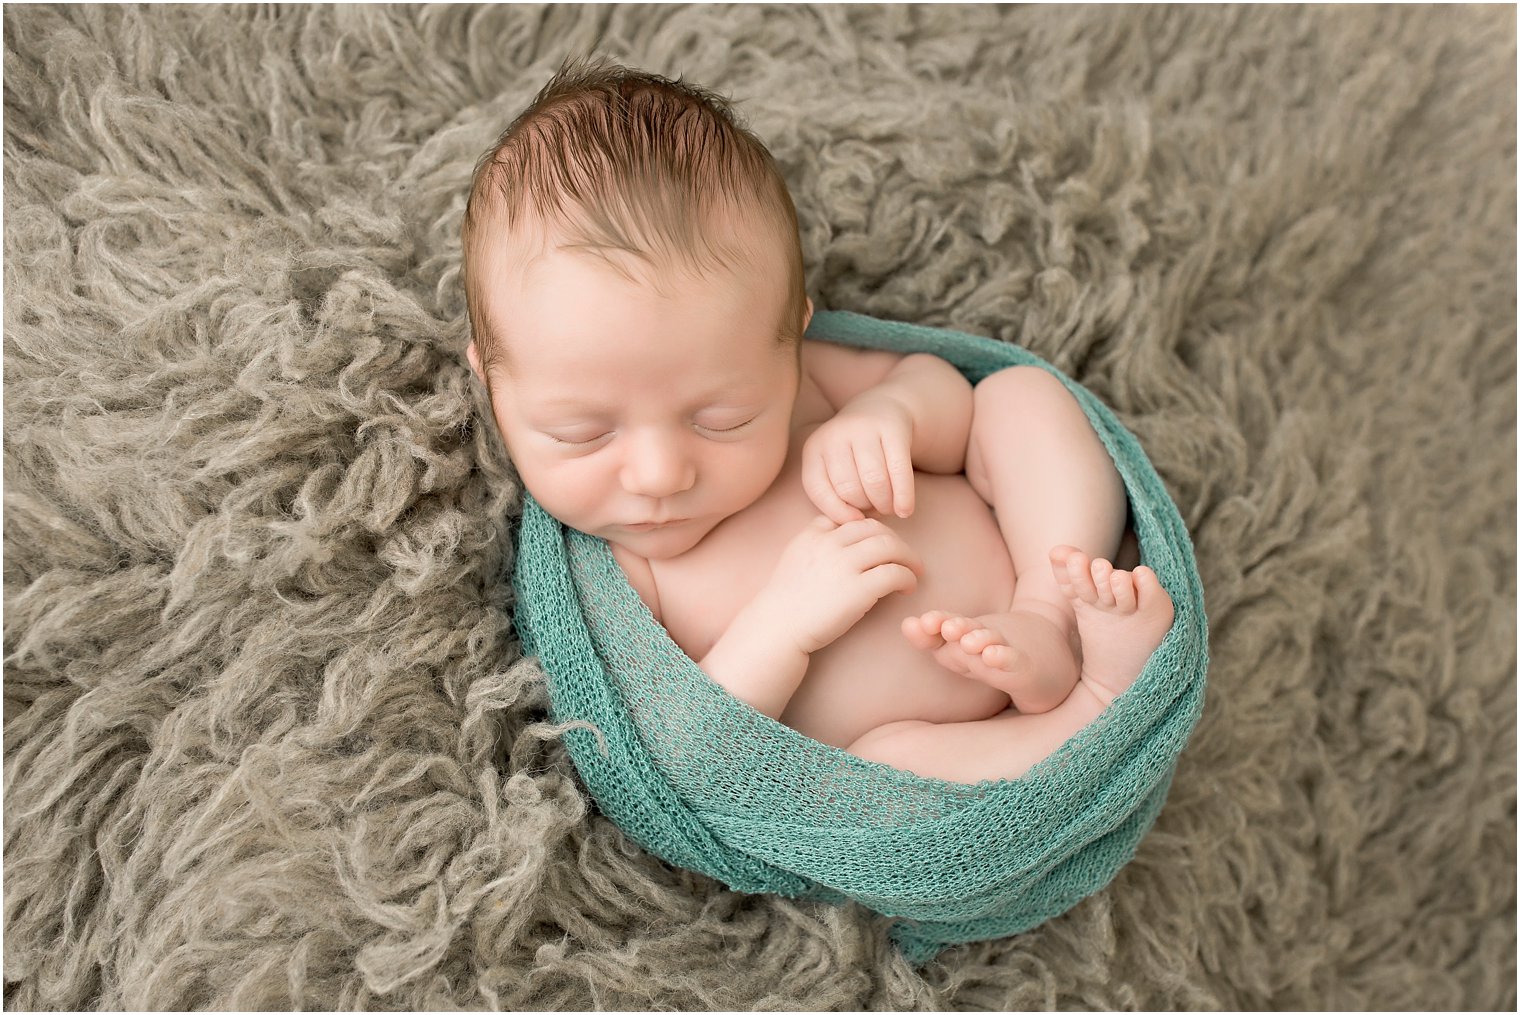 Newborn boy in gray and turquoise wrap | Photo by Idalia Photography